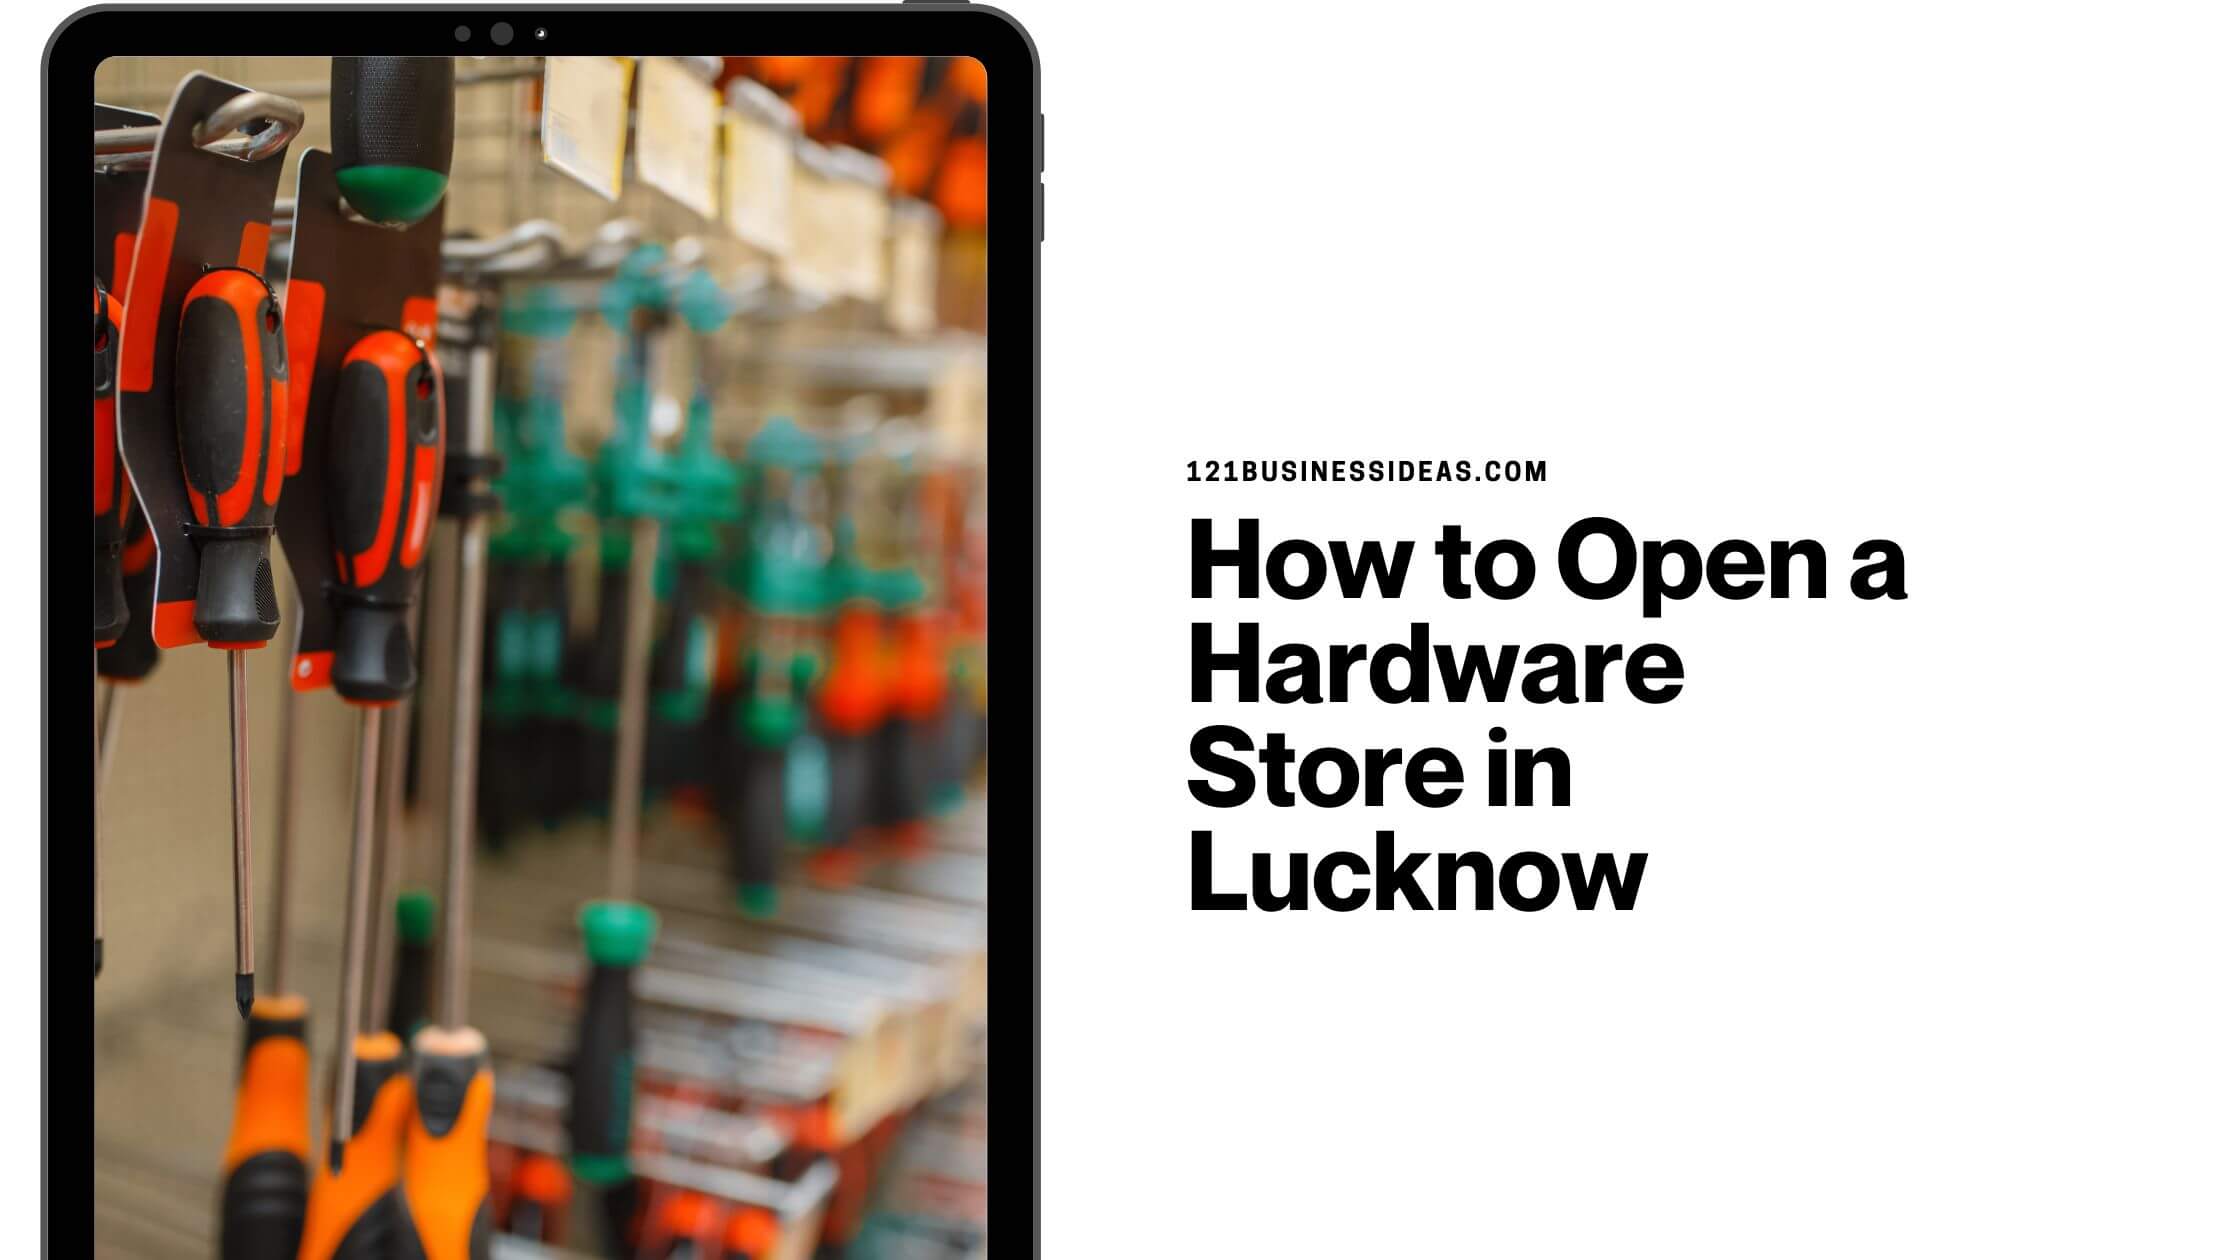 How to Open a Hardware Store in Lucknow (1)